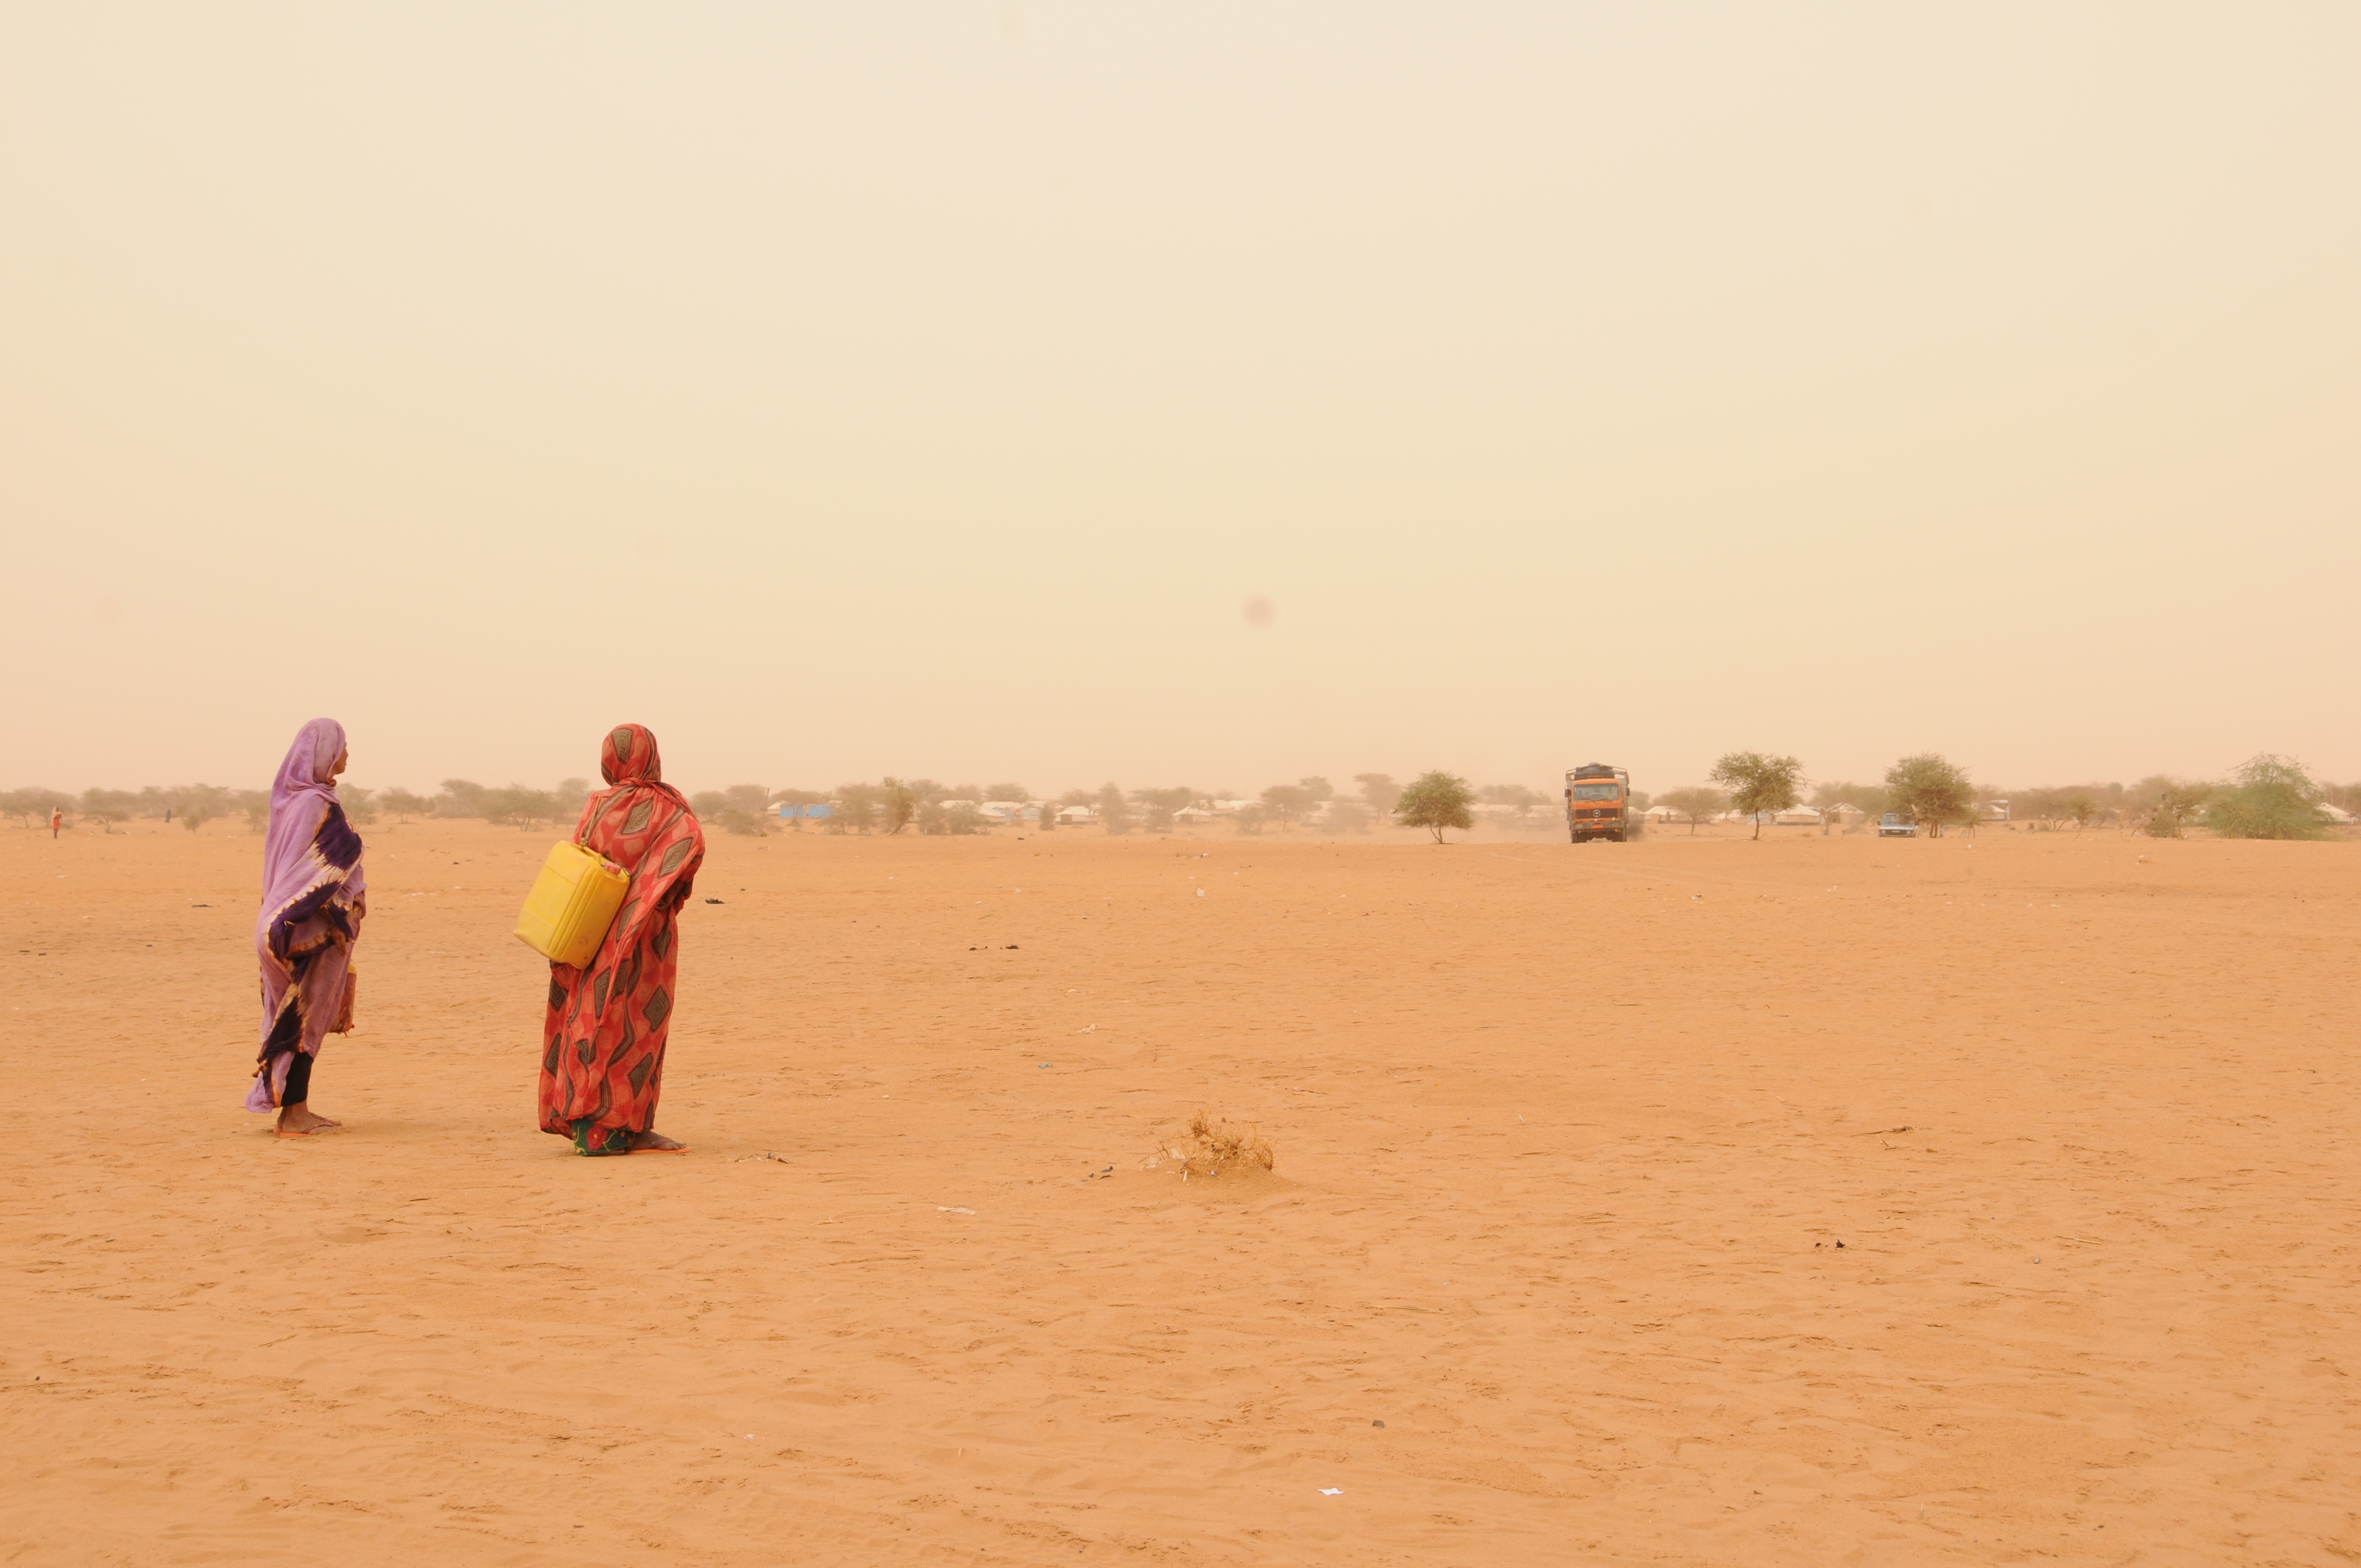 Women displaced by the conflict in Mali often walk long distances in search of water and wood outside makeshift camps in Niger